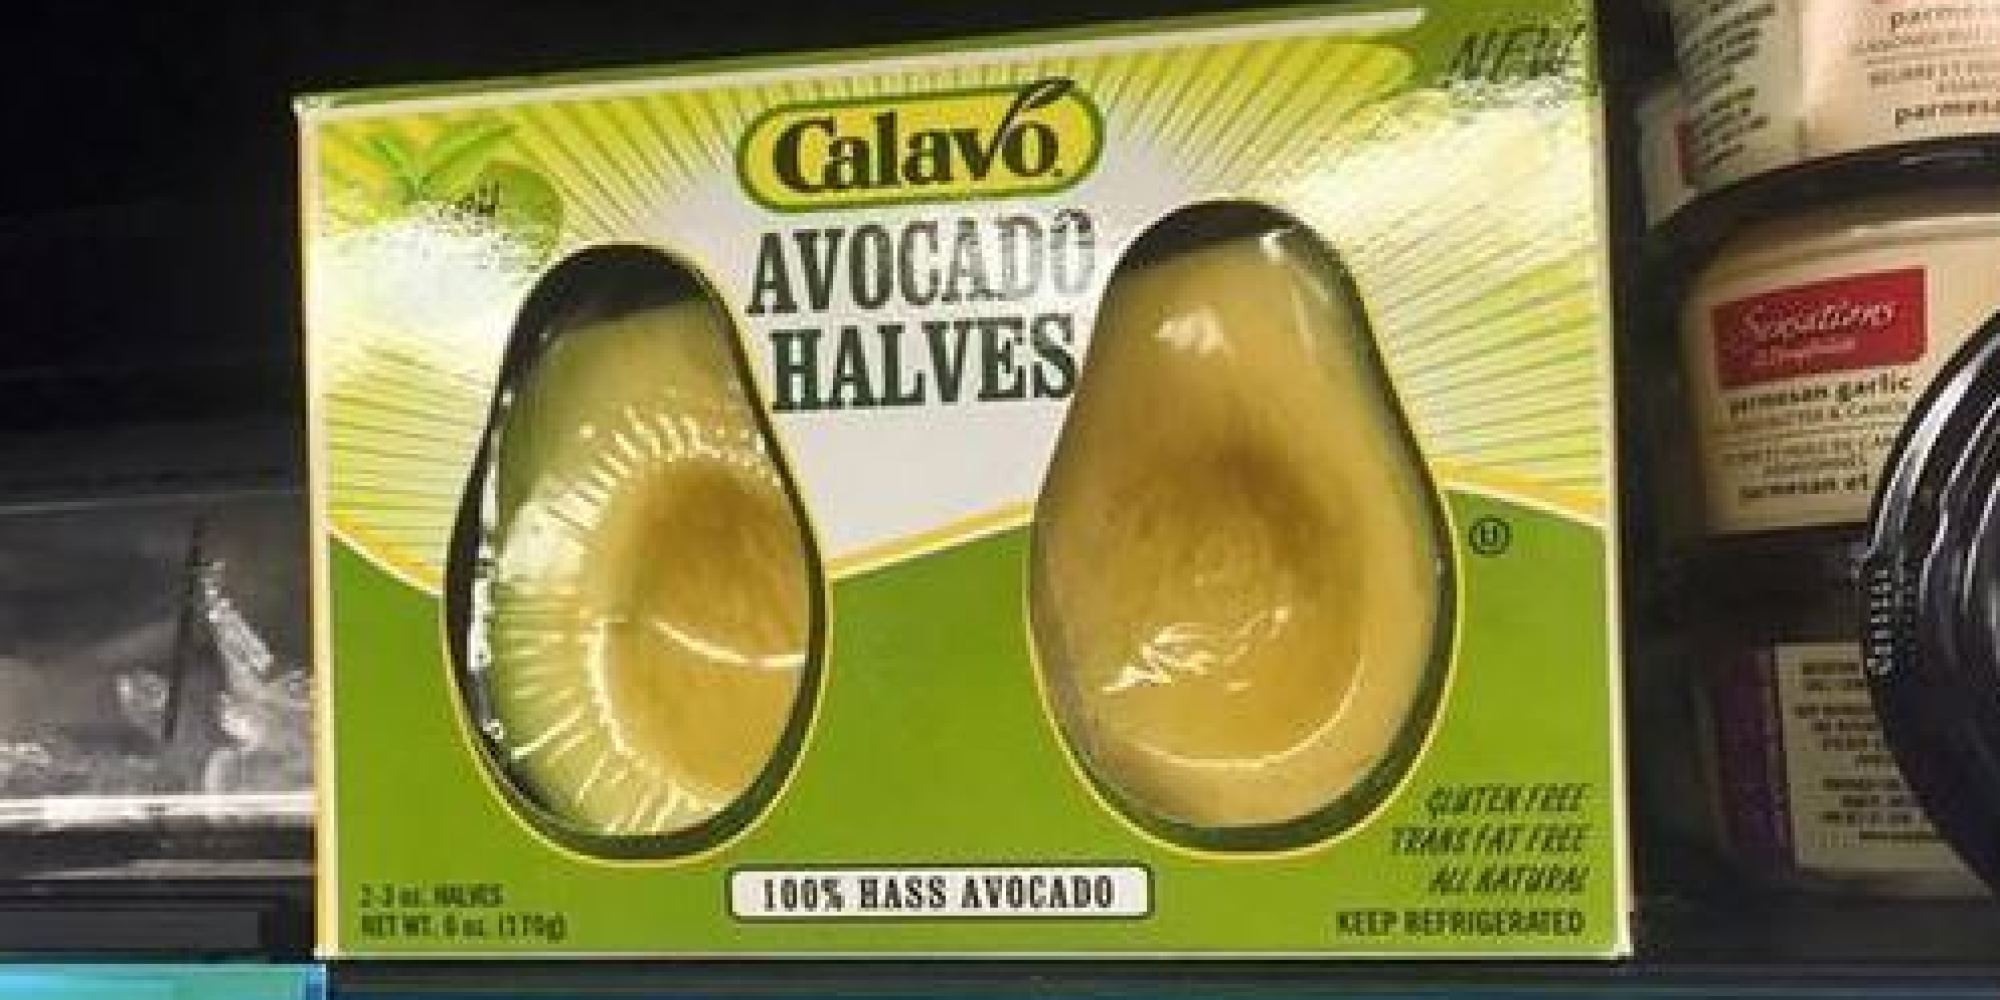 16 Examples of Bad Product Packaging That Will Make You Scream! 7